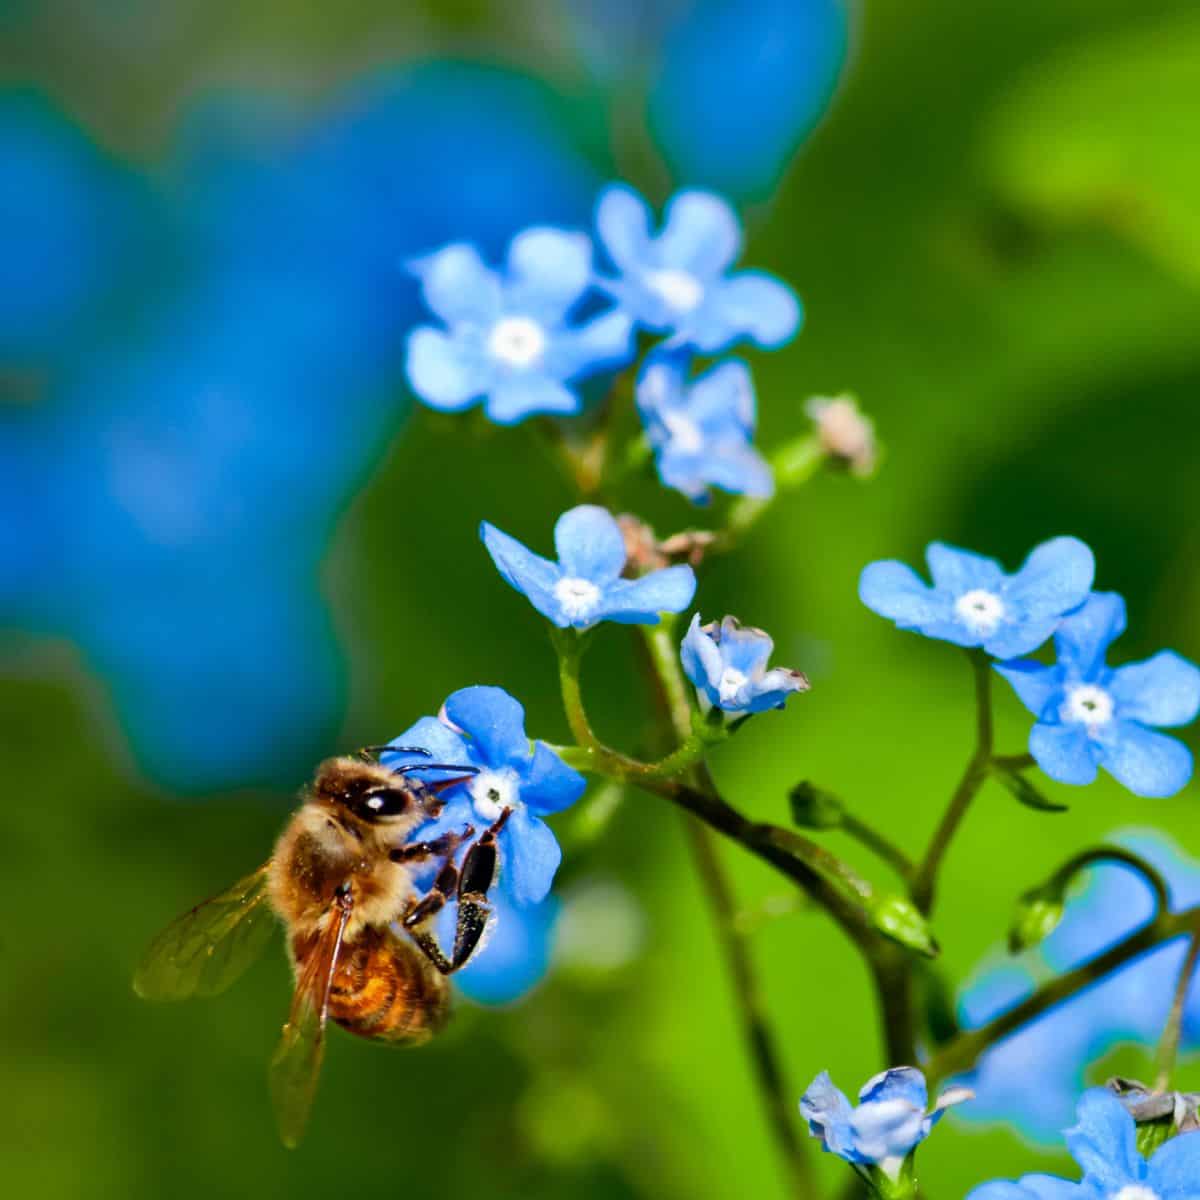 Bee drinking nectar from blue flower.
